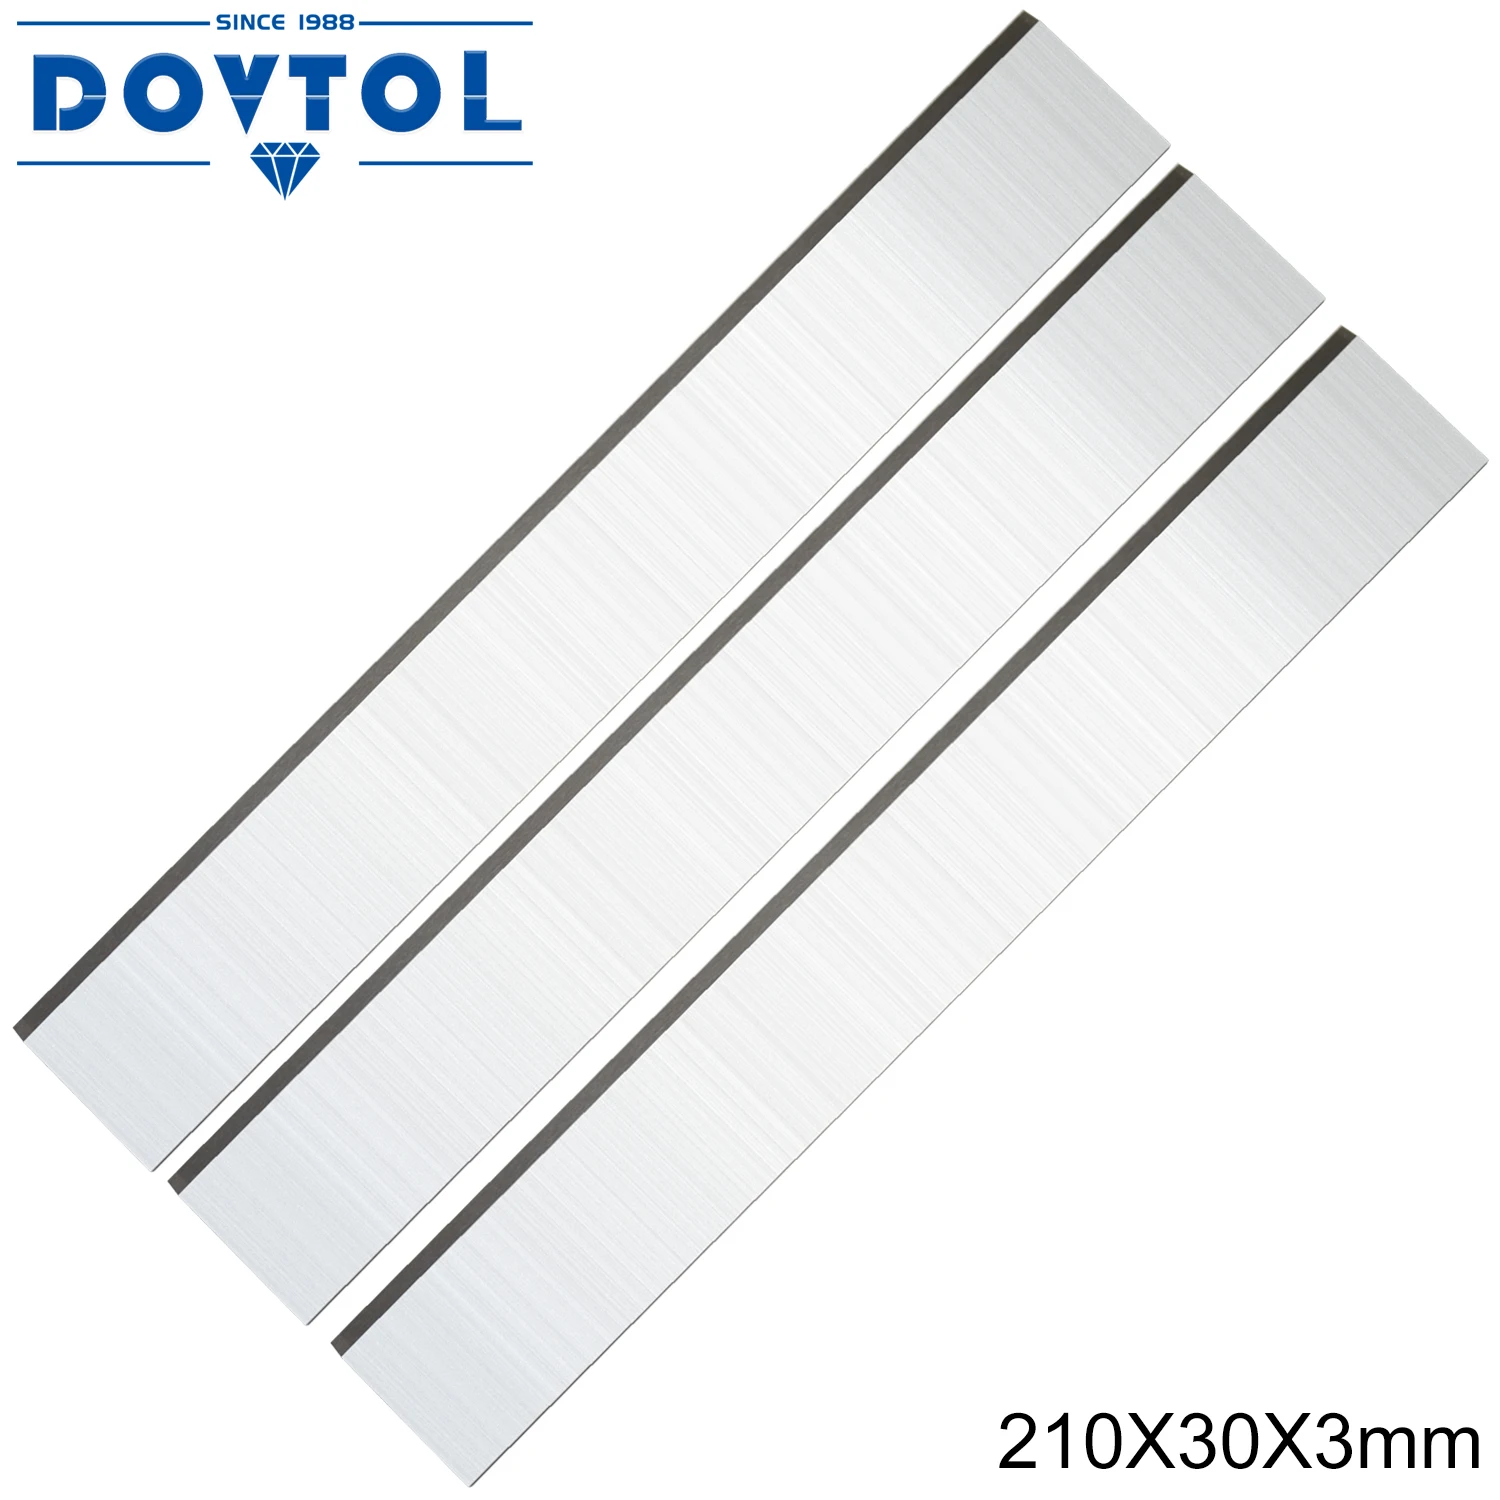 

210x30x3mm Industrial Planer and Jointer Blades Knives Replacement for all 210mm Thickness Planer 3pcs